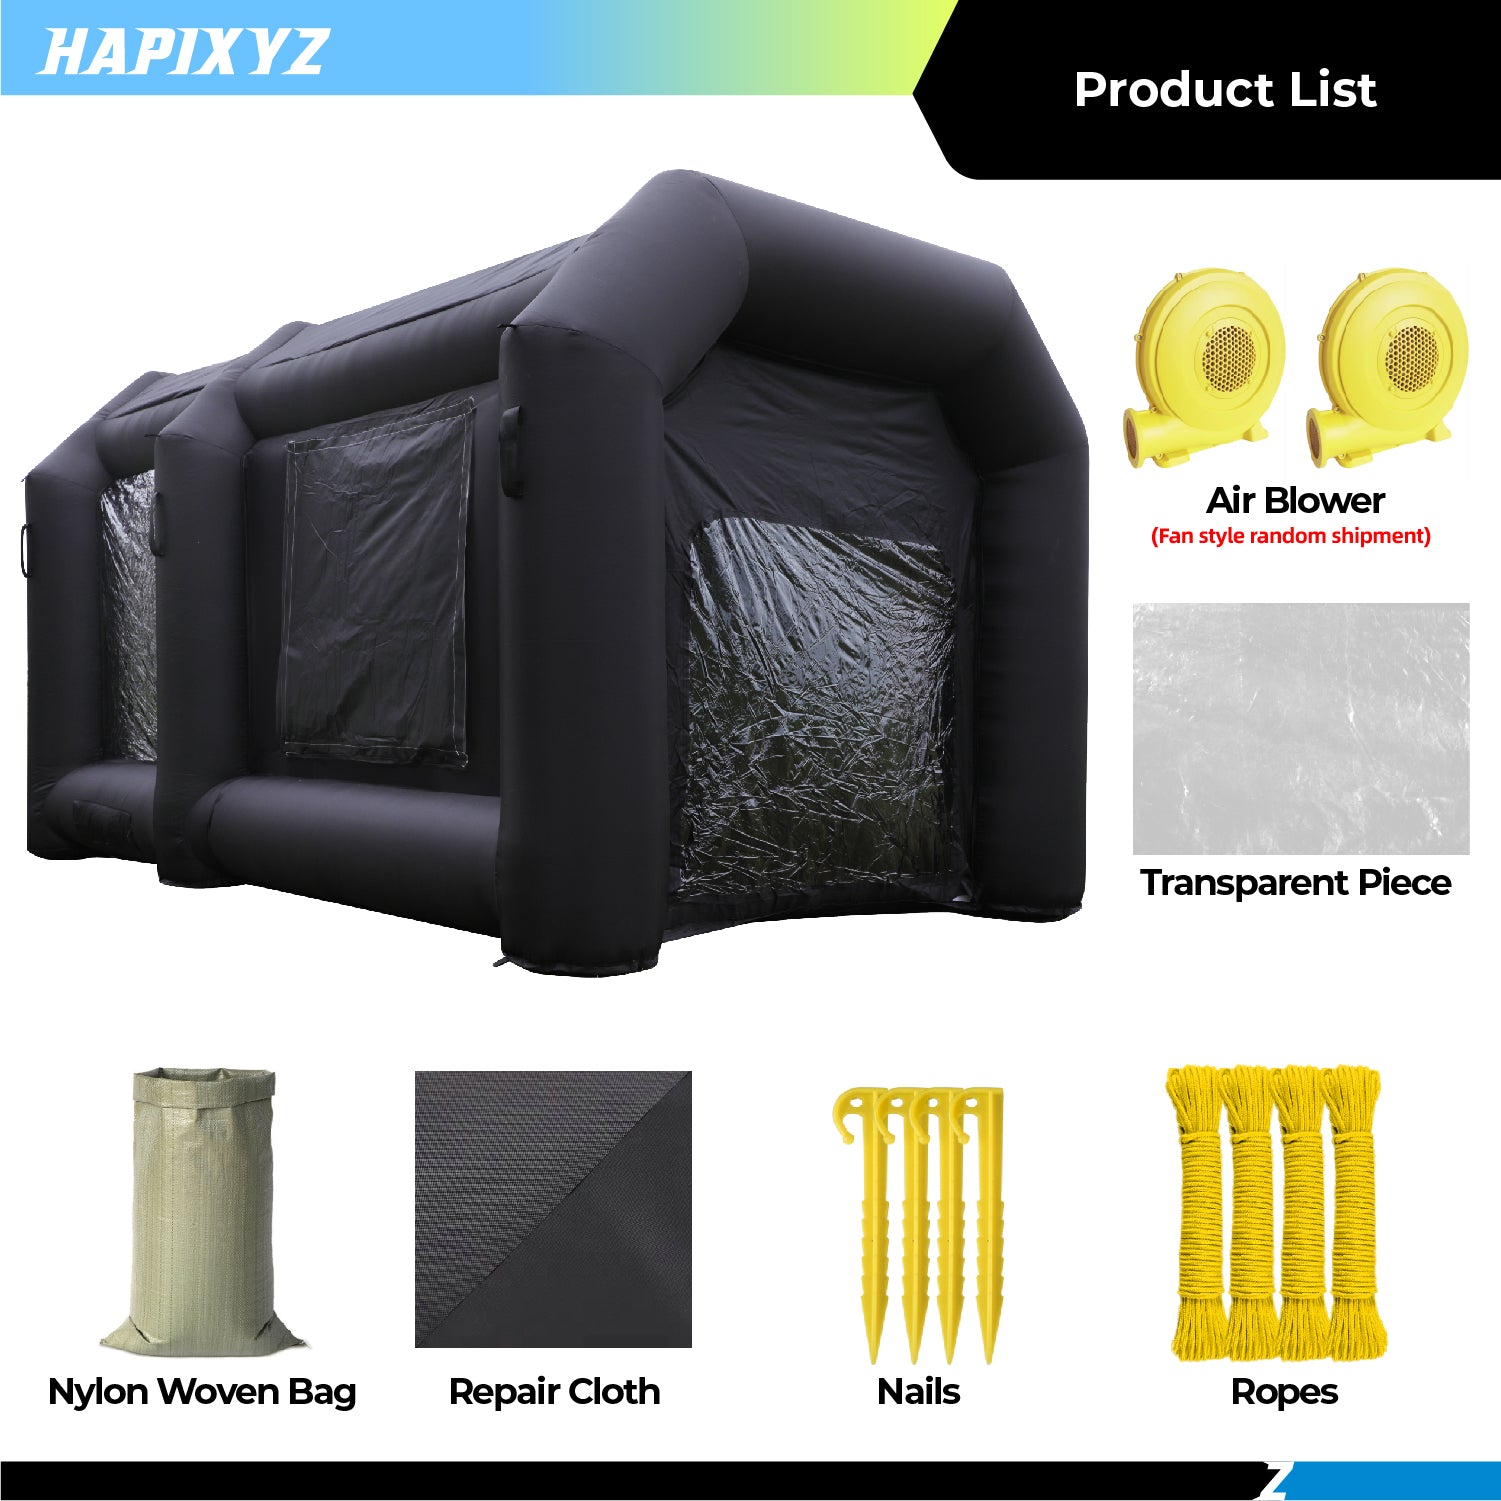 Happybuy Portable Inflatable Paint Booth, 13x8x8ft Inflatable Spray Booth, Car Paint Tent Air Filter System & 2 Blowers, Upgraded Blow Up Spray